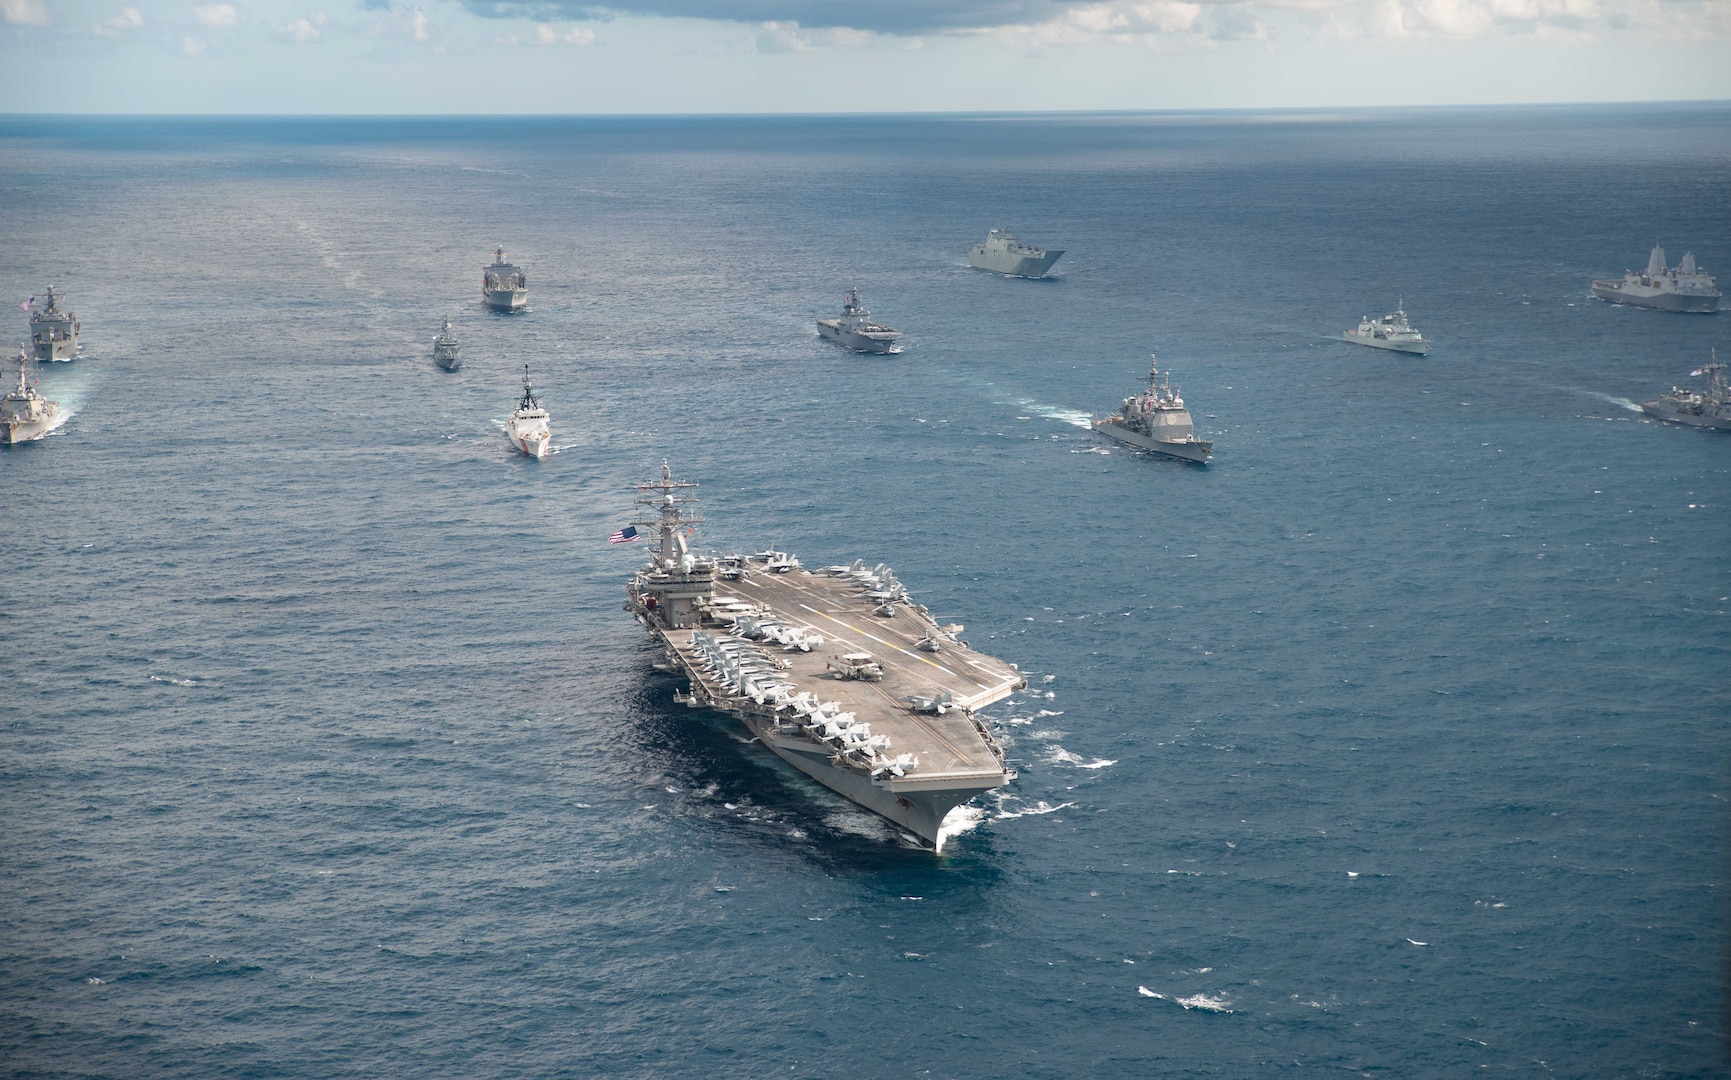 IMAGE: CORAL SEA (July 11, 2019) The U.S. Navy Nimitz-class aircraft carrier USS Ronald Reagan (CVN 76) leads a formation of 17 other ships from the U.S. Navy, U.S. Coast Guard, Royal Australian Navy, Royal Canadian Navy and Japan Maritime Self-Defense Force (JMSDF) during Talisman Sabre 2019. Talisman Sabre 2019 illustrates the closeness of the Australian and U.S. alliance and the strength of the military-to-military relationship. This is the eighth iteration of this exercise. (U.S. Navy photo by Mass Communication Specialist 3rd Class Jason Tarleton/Released)